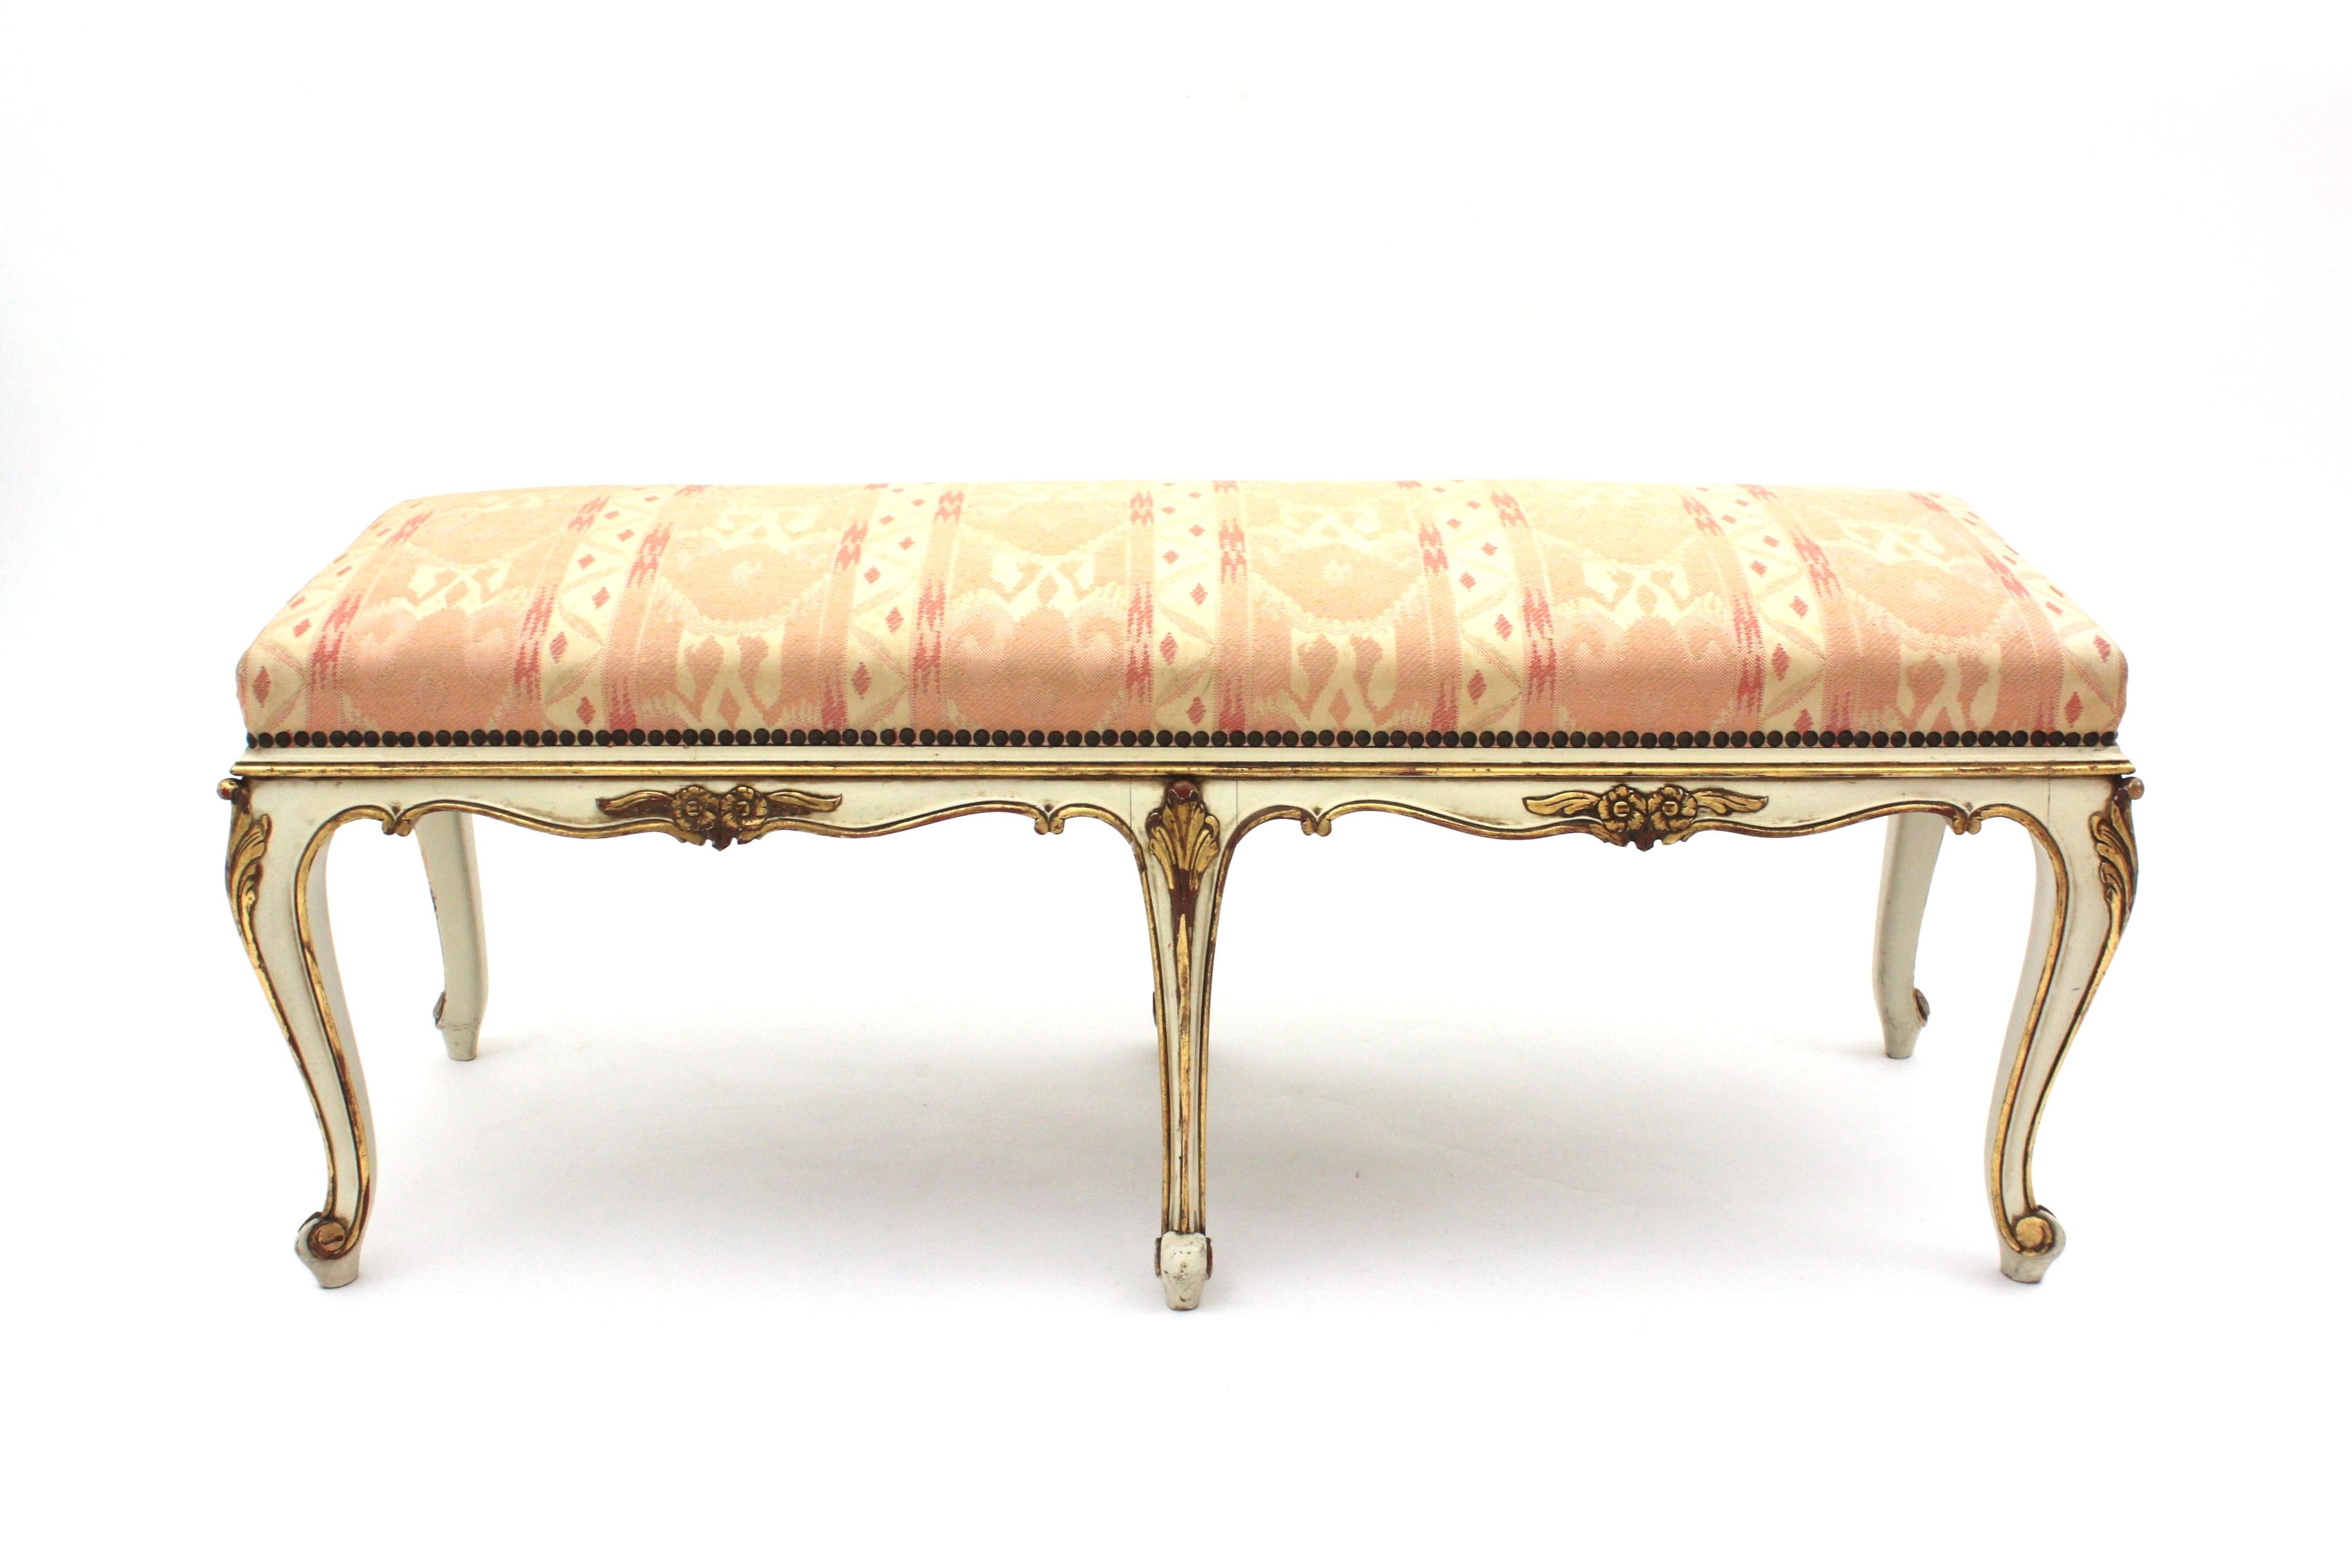 Louis XV style carved parcel-gilt wood bench patinated in ivory color, France, 1930s-1940s.
This bench or stool is raised on six cabriole shaped legs with carved floral knees and foliage motifs and it is accented by decorative gold gilt